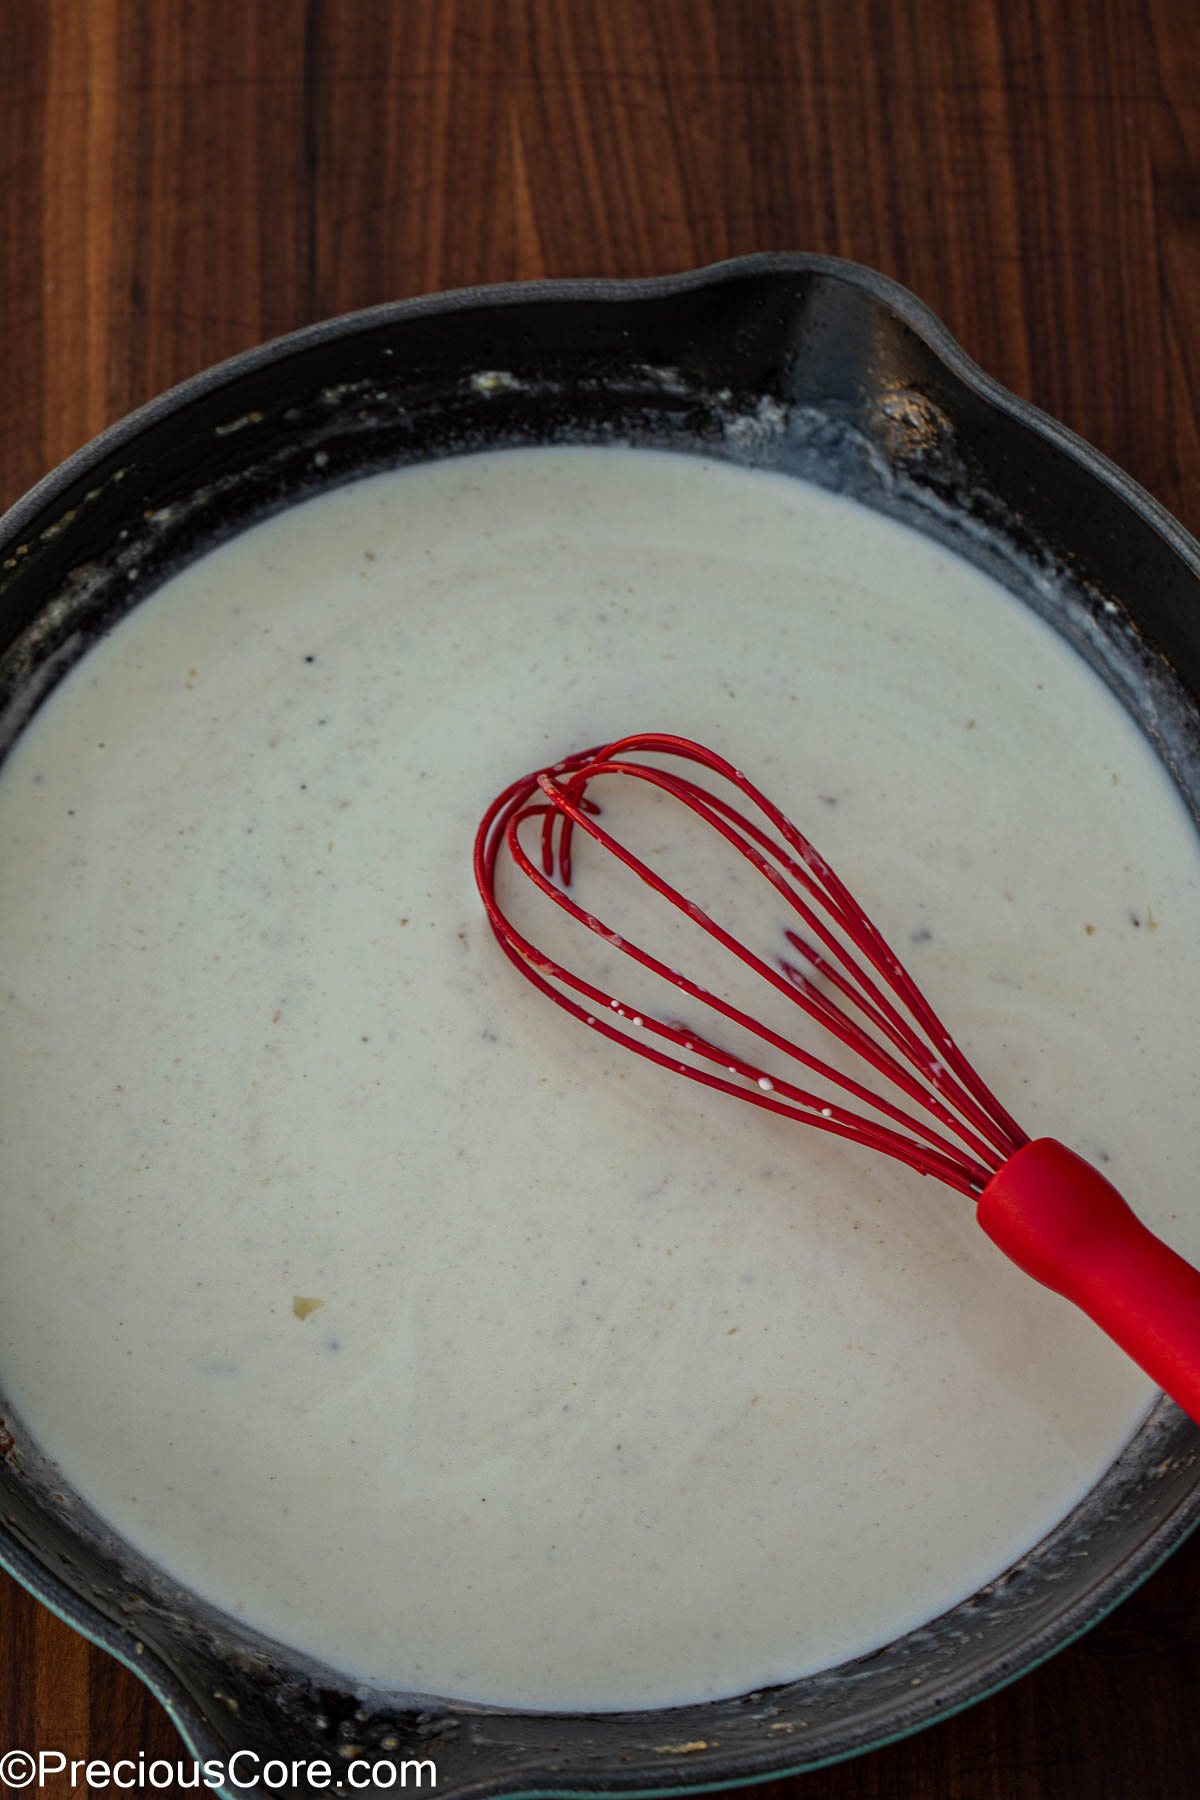 White sauce cooking in a pan.